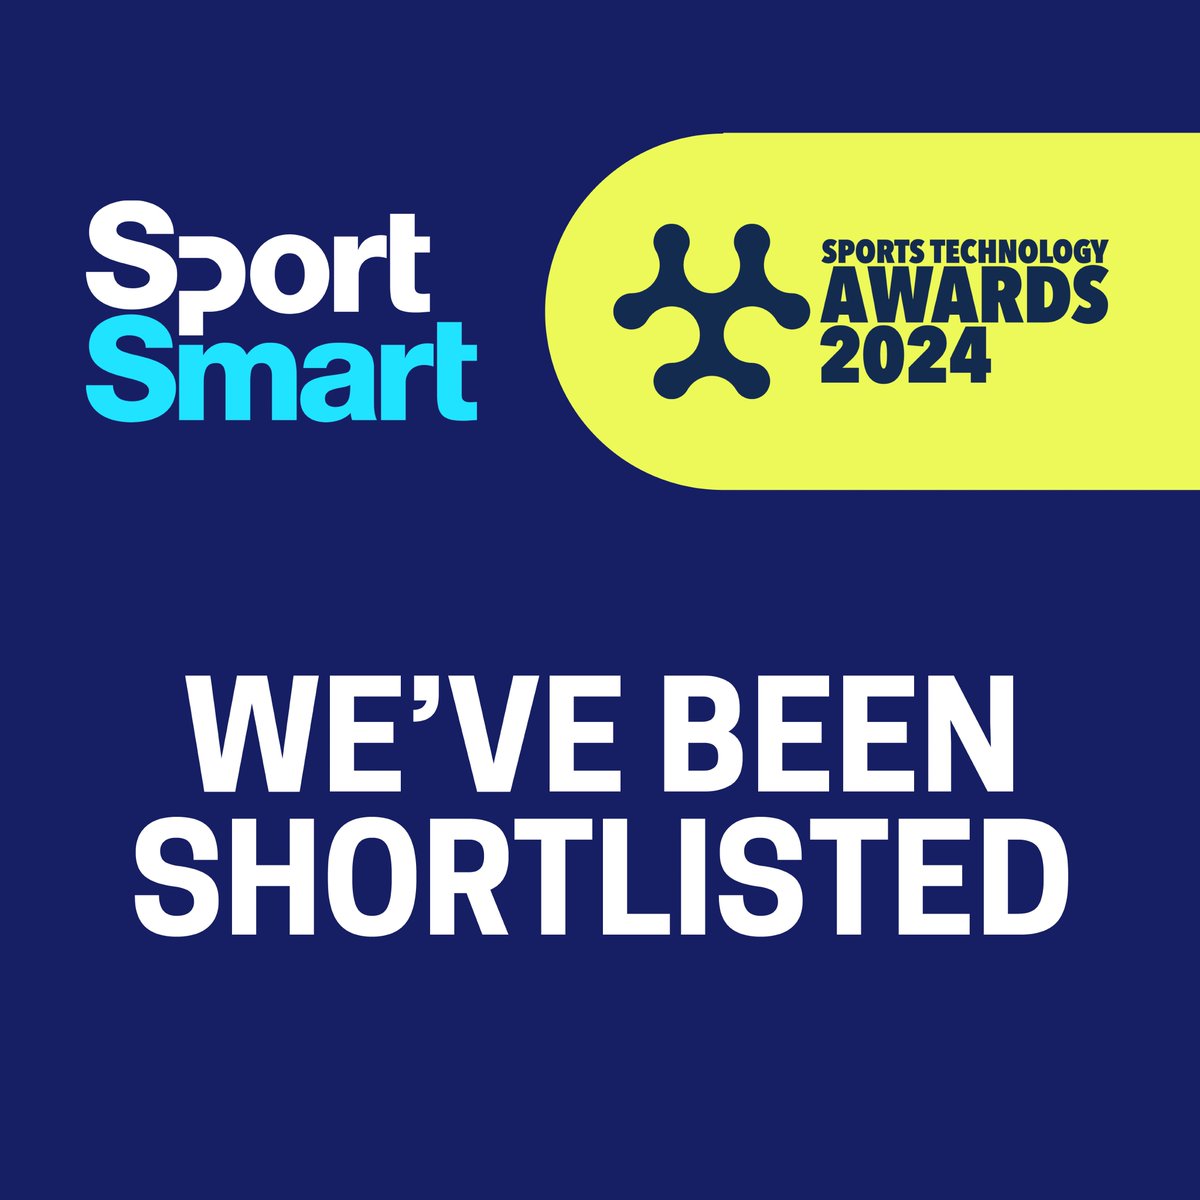 🎉We're delighted that SportSmart has been shortlisted in @SportTechGroup Awards 2024 in the Digital category. The Awards aim to celebrate world-class innovation in the sport sector. 🤞Keeping our fingers crossed for the win. #STA24 #OnlyfortheInnovative